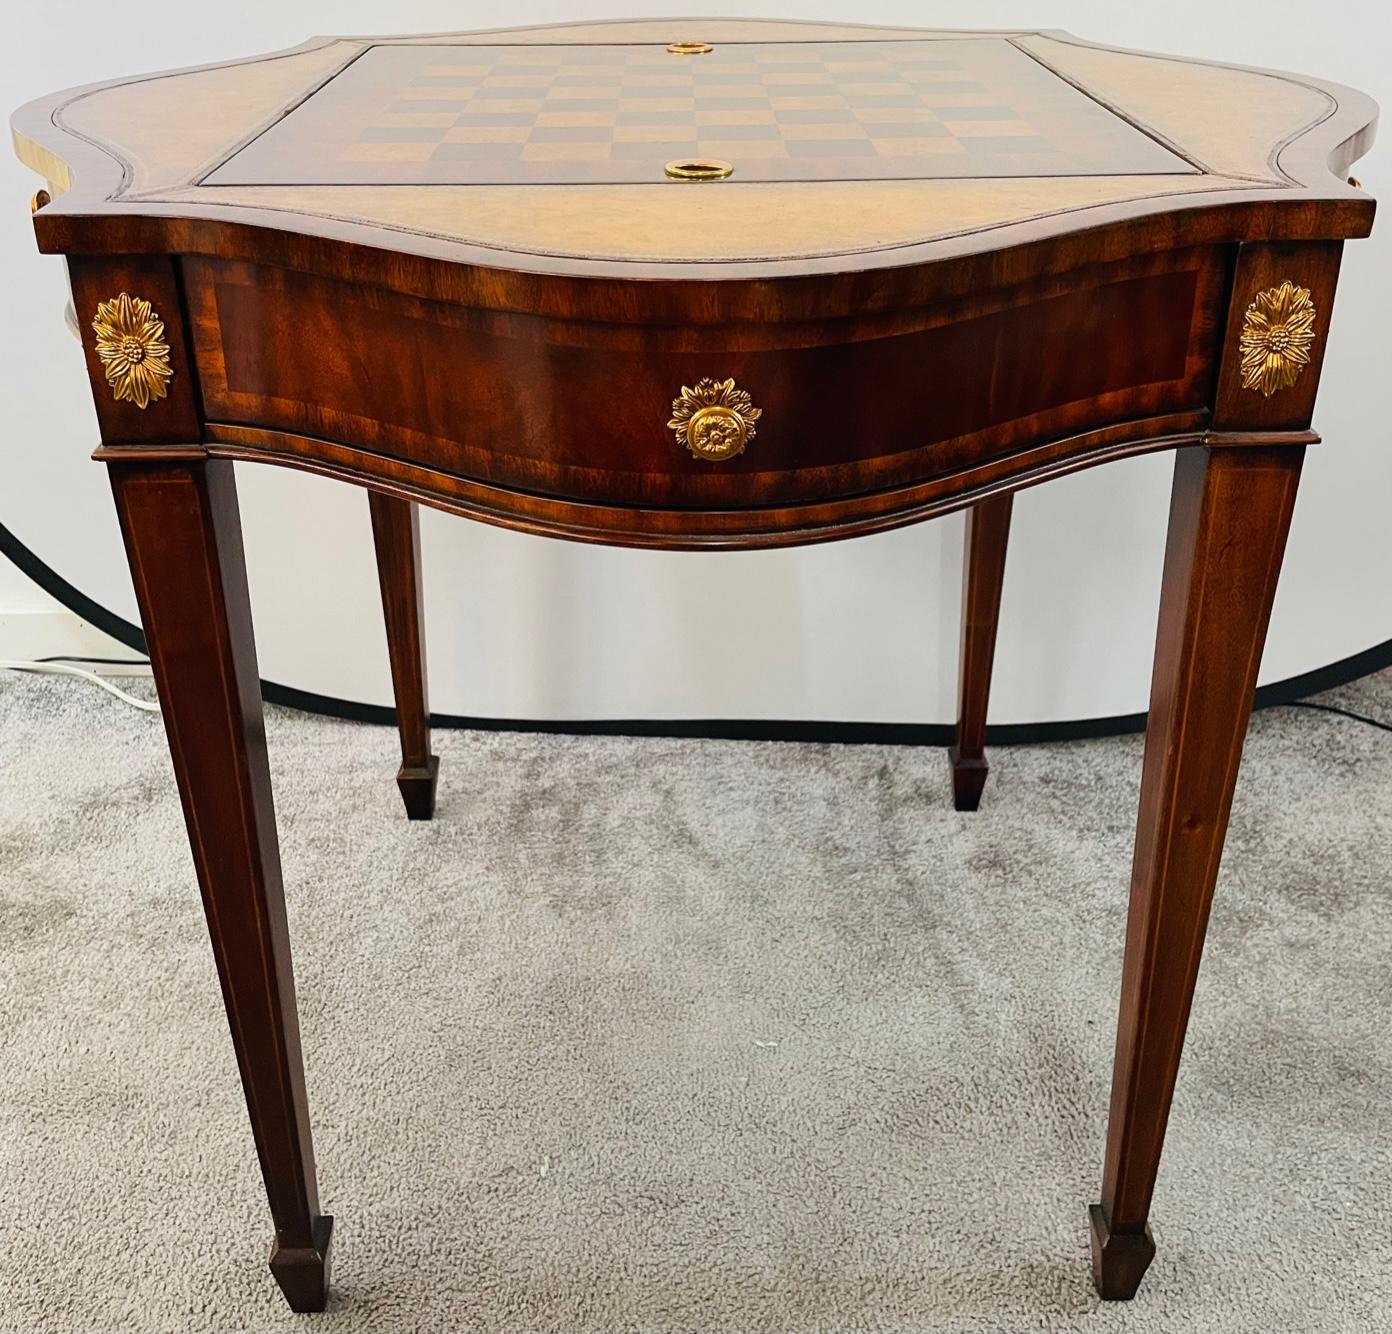 An elegant backgammon/ chest or card game table by Maitland Smith. The Regency style table features two drawers and beautiful curvy design all made of high quality Mahogany wood and veneer with original brass hardware and quality inlay and leather